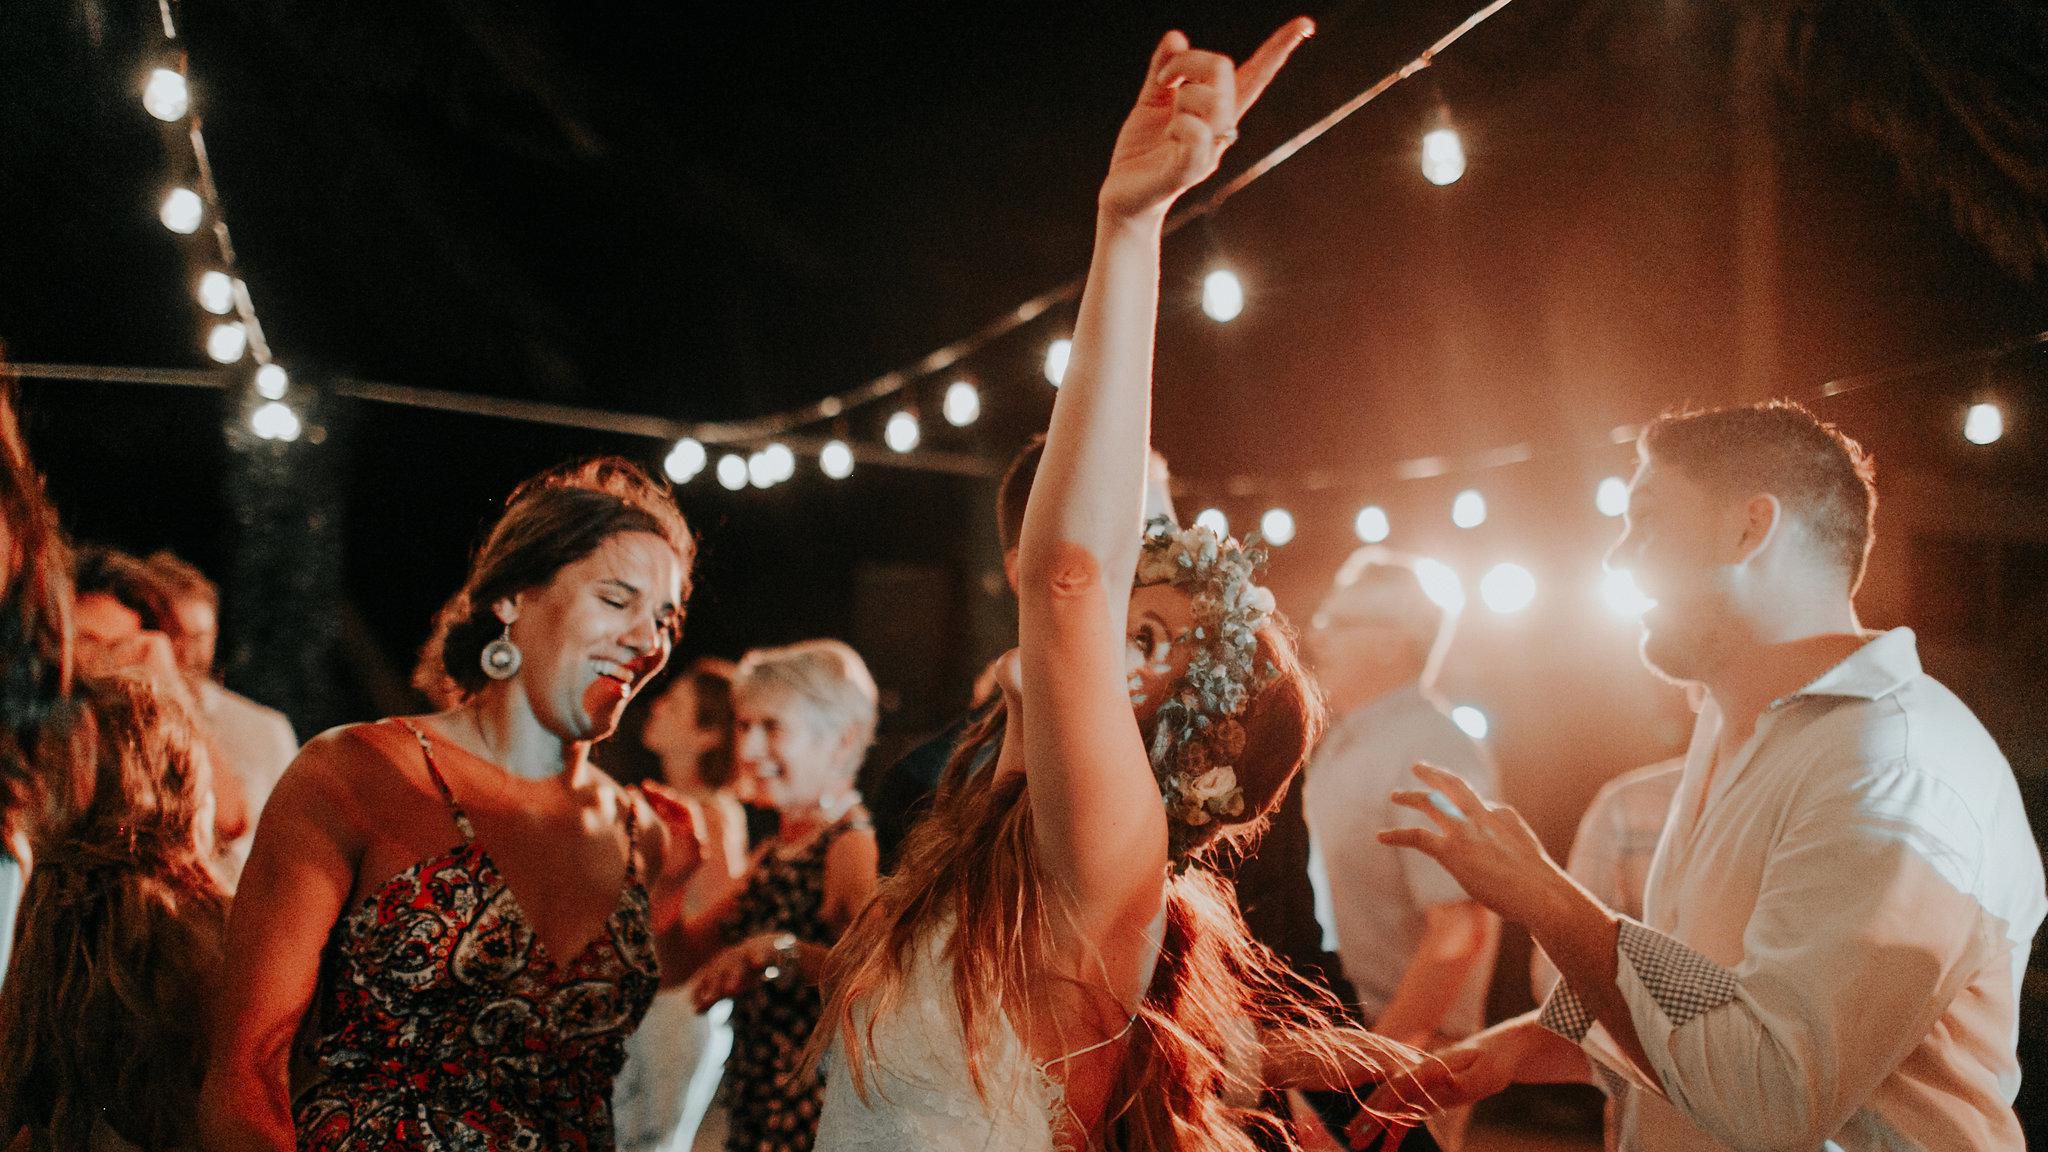 50 Great Song Choices for Your Wedding Day Playlist